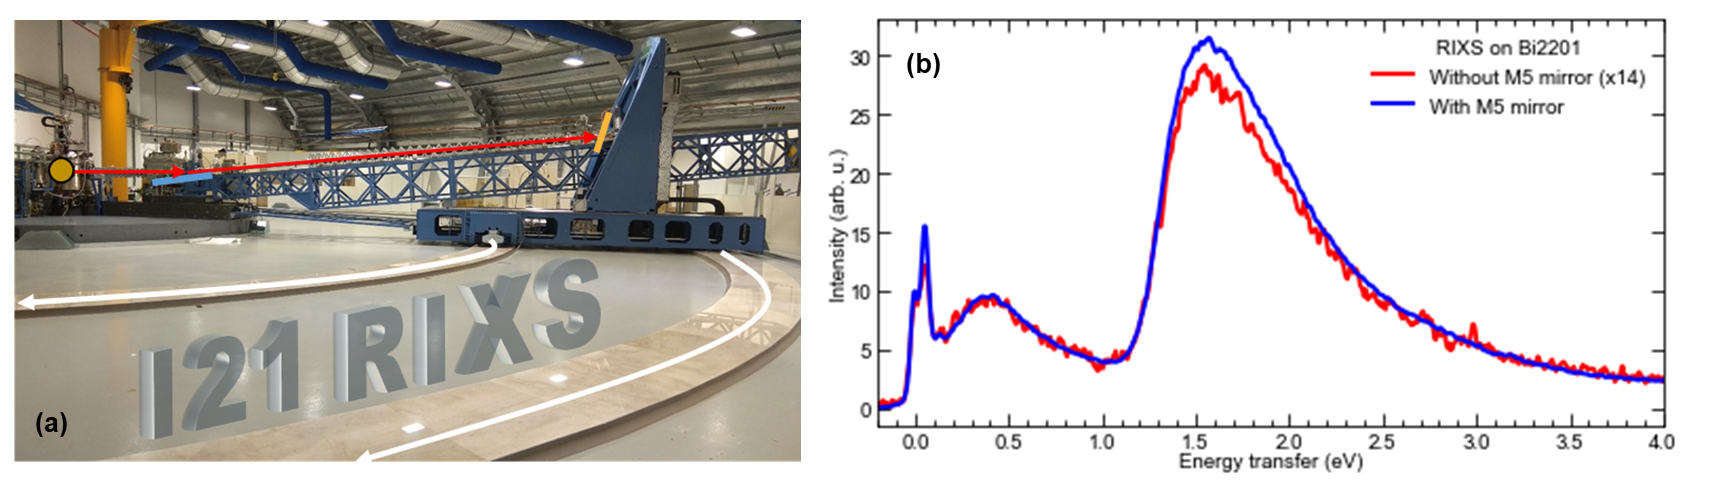 Fig 1. (a): RIXS spectrometer at I21. (b) Comparison of RIXS signal from a real sample (Bi2201) with and without the collecting mirror.